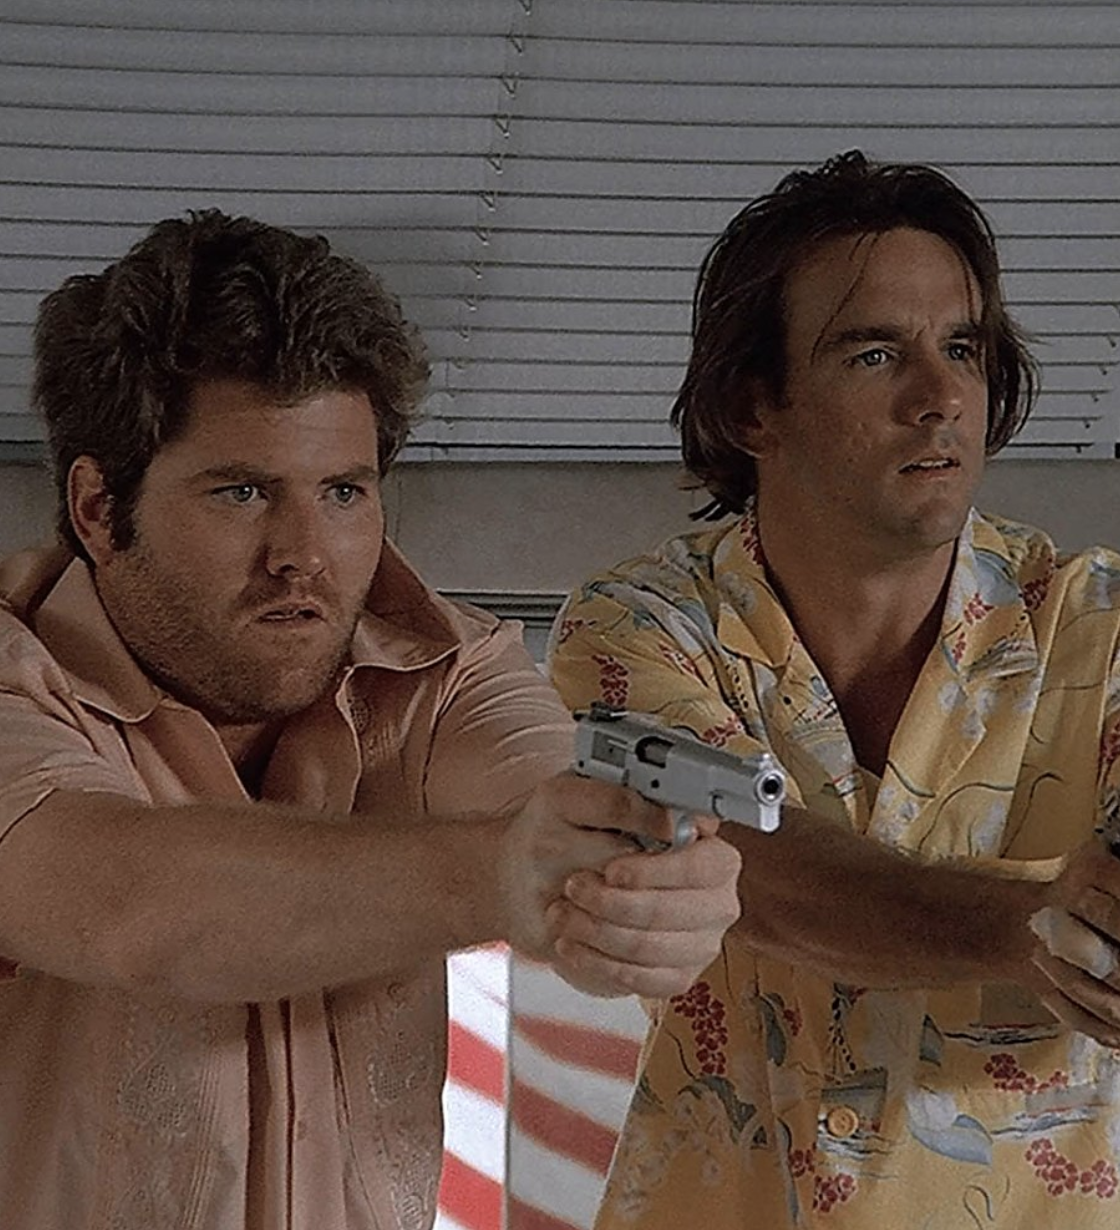 Miami Vice's Stan with a work partner holding guns